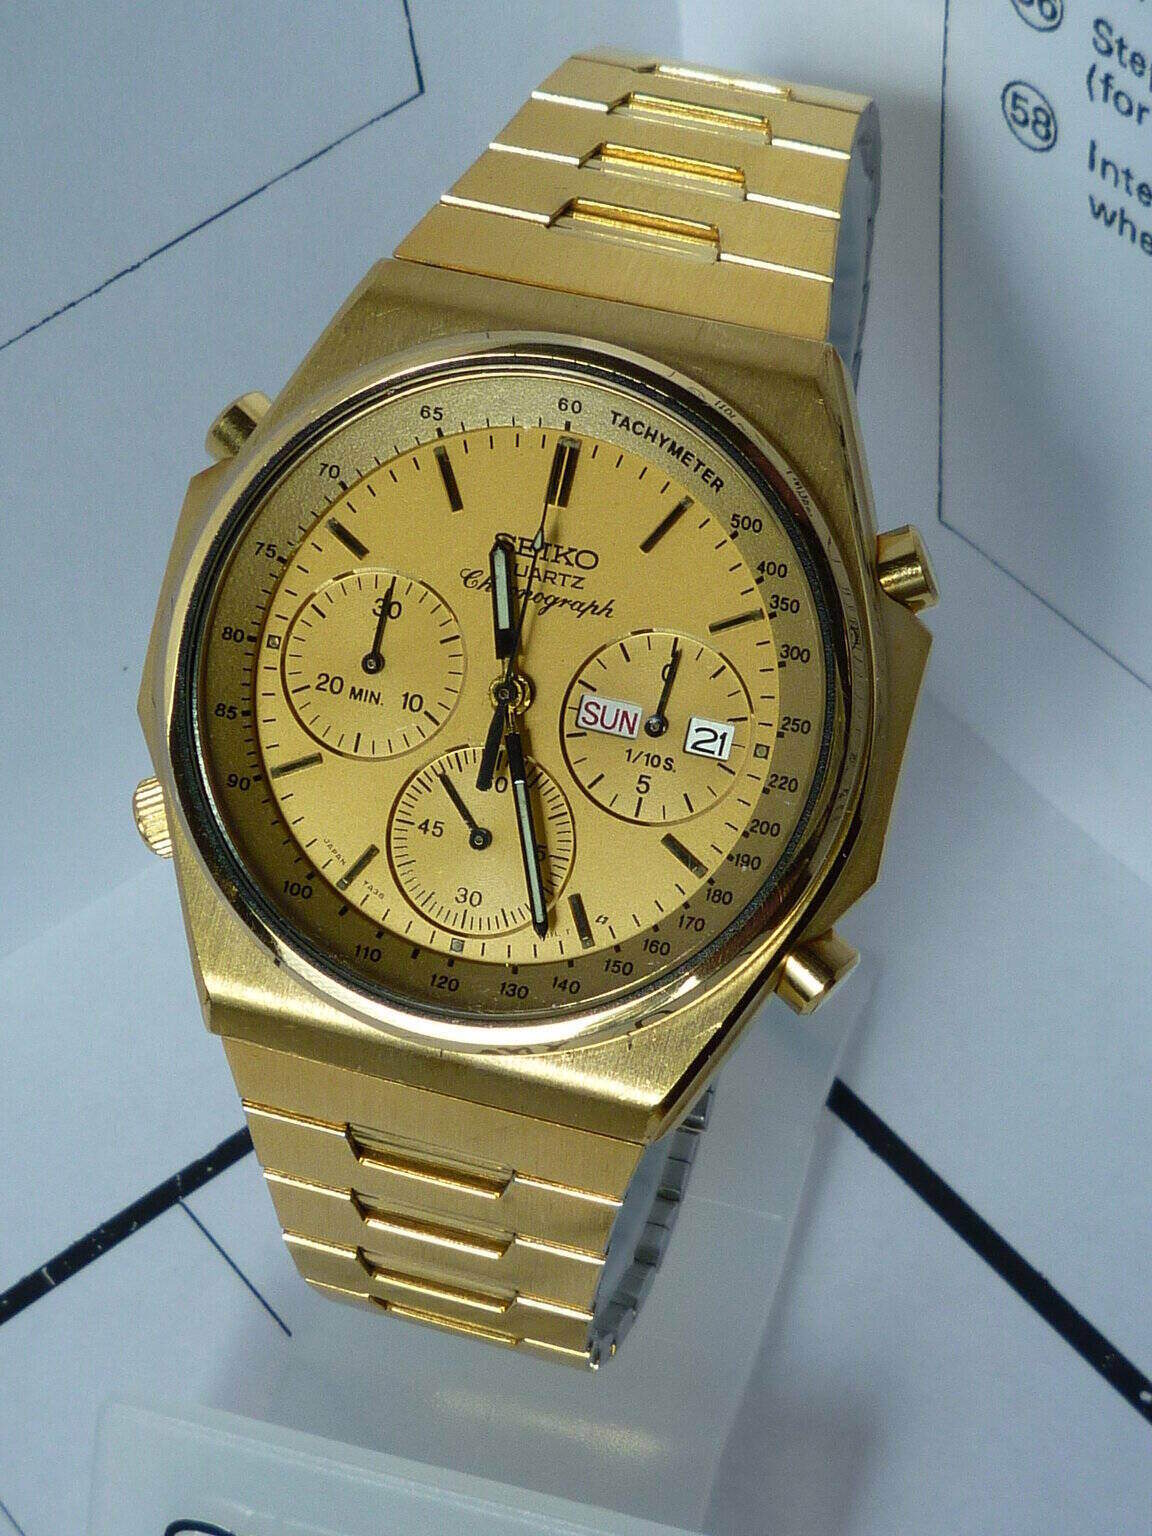 rsz_7a38-7000-gold-gold-sold-ebay-march2010-p1010448.jpg